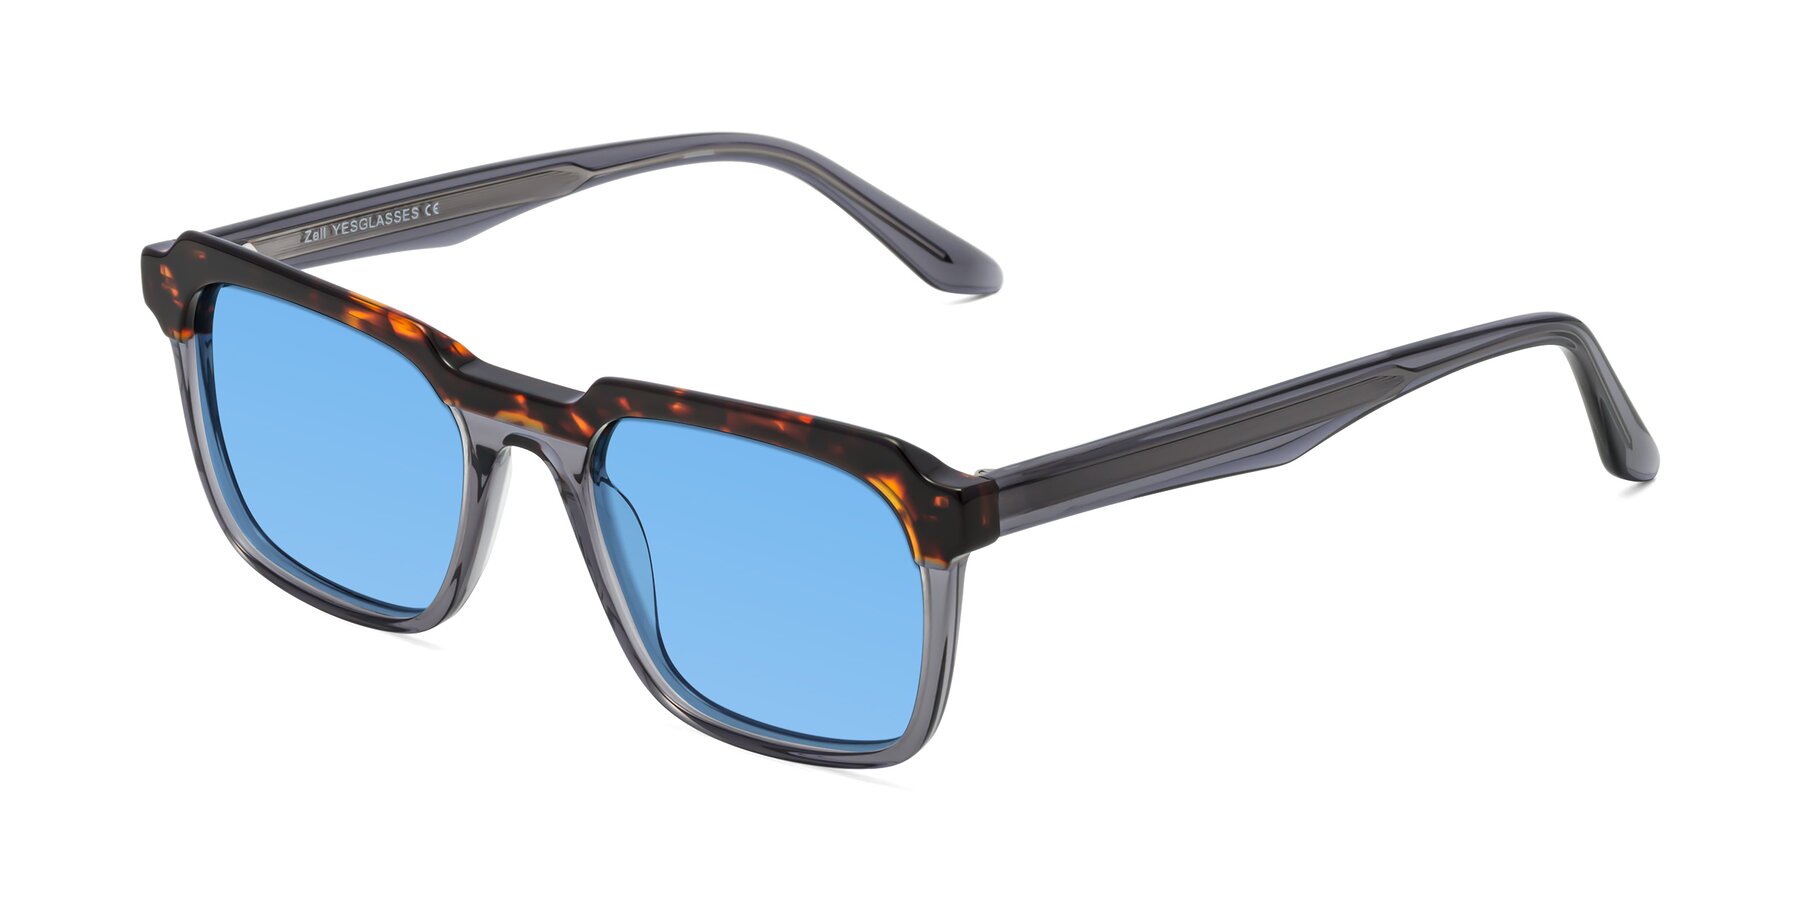 Angle of Zell in Tortoise/Gray with Medium Blue Tinted Lenses